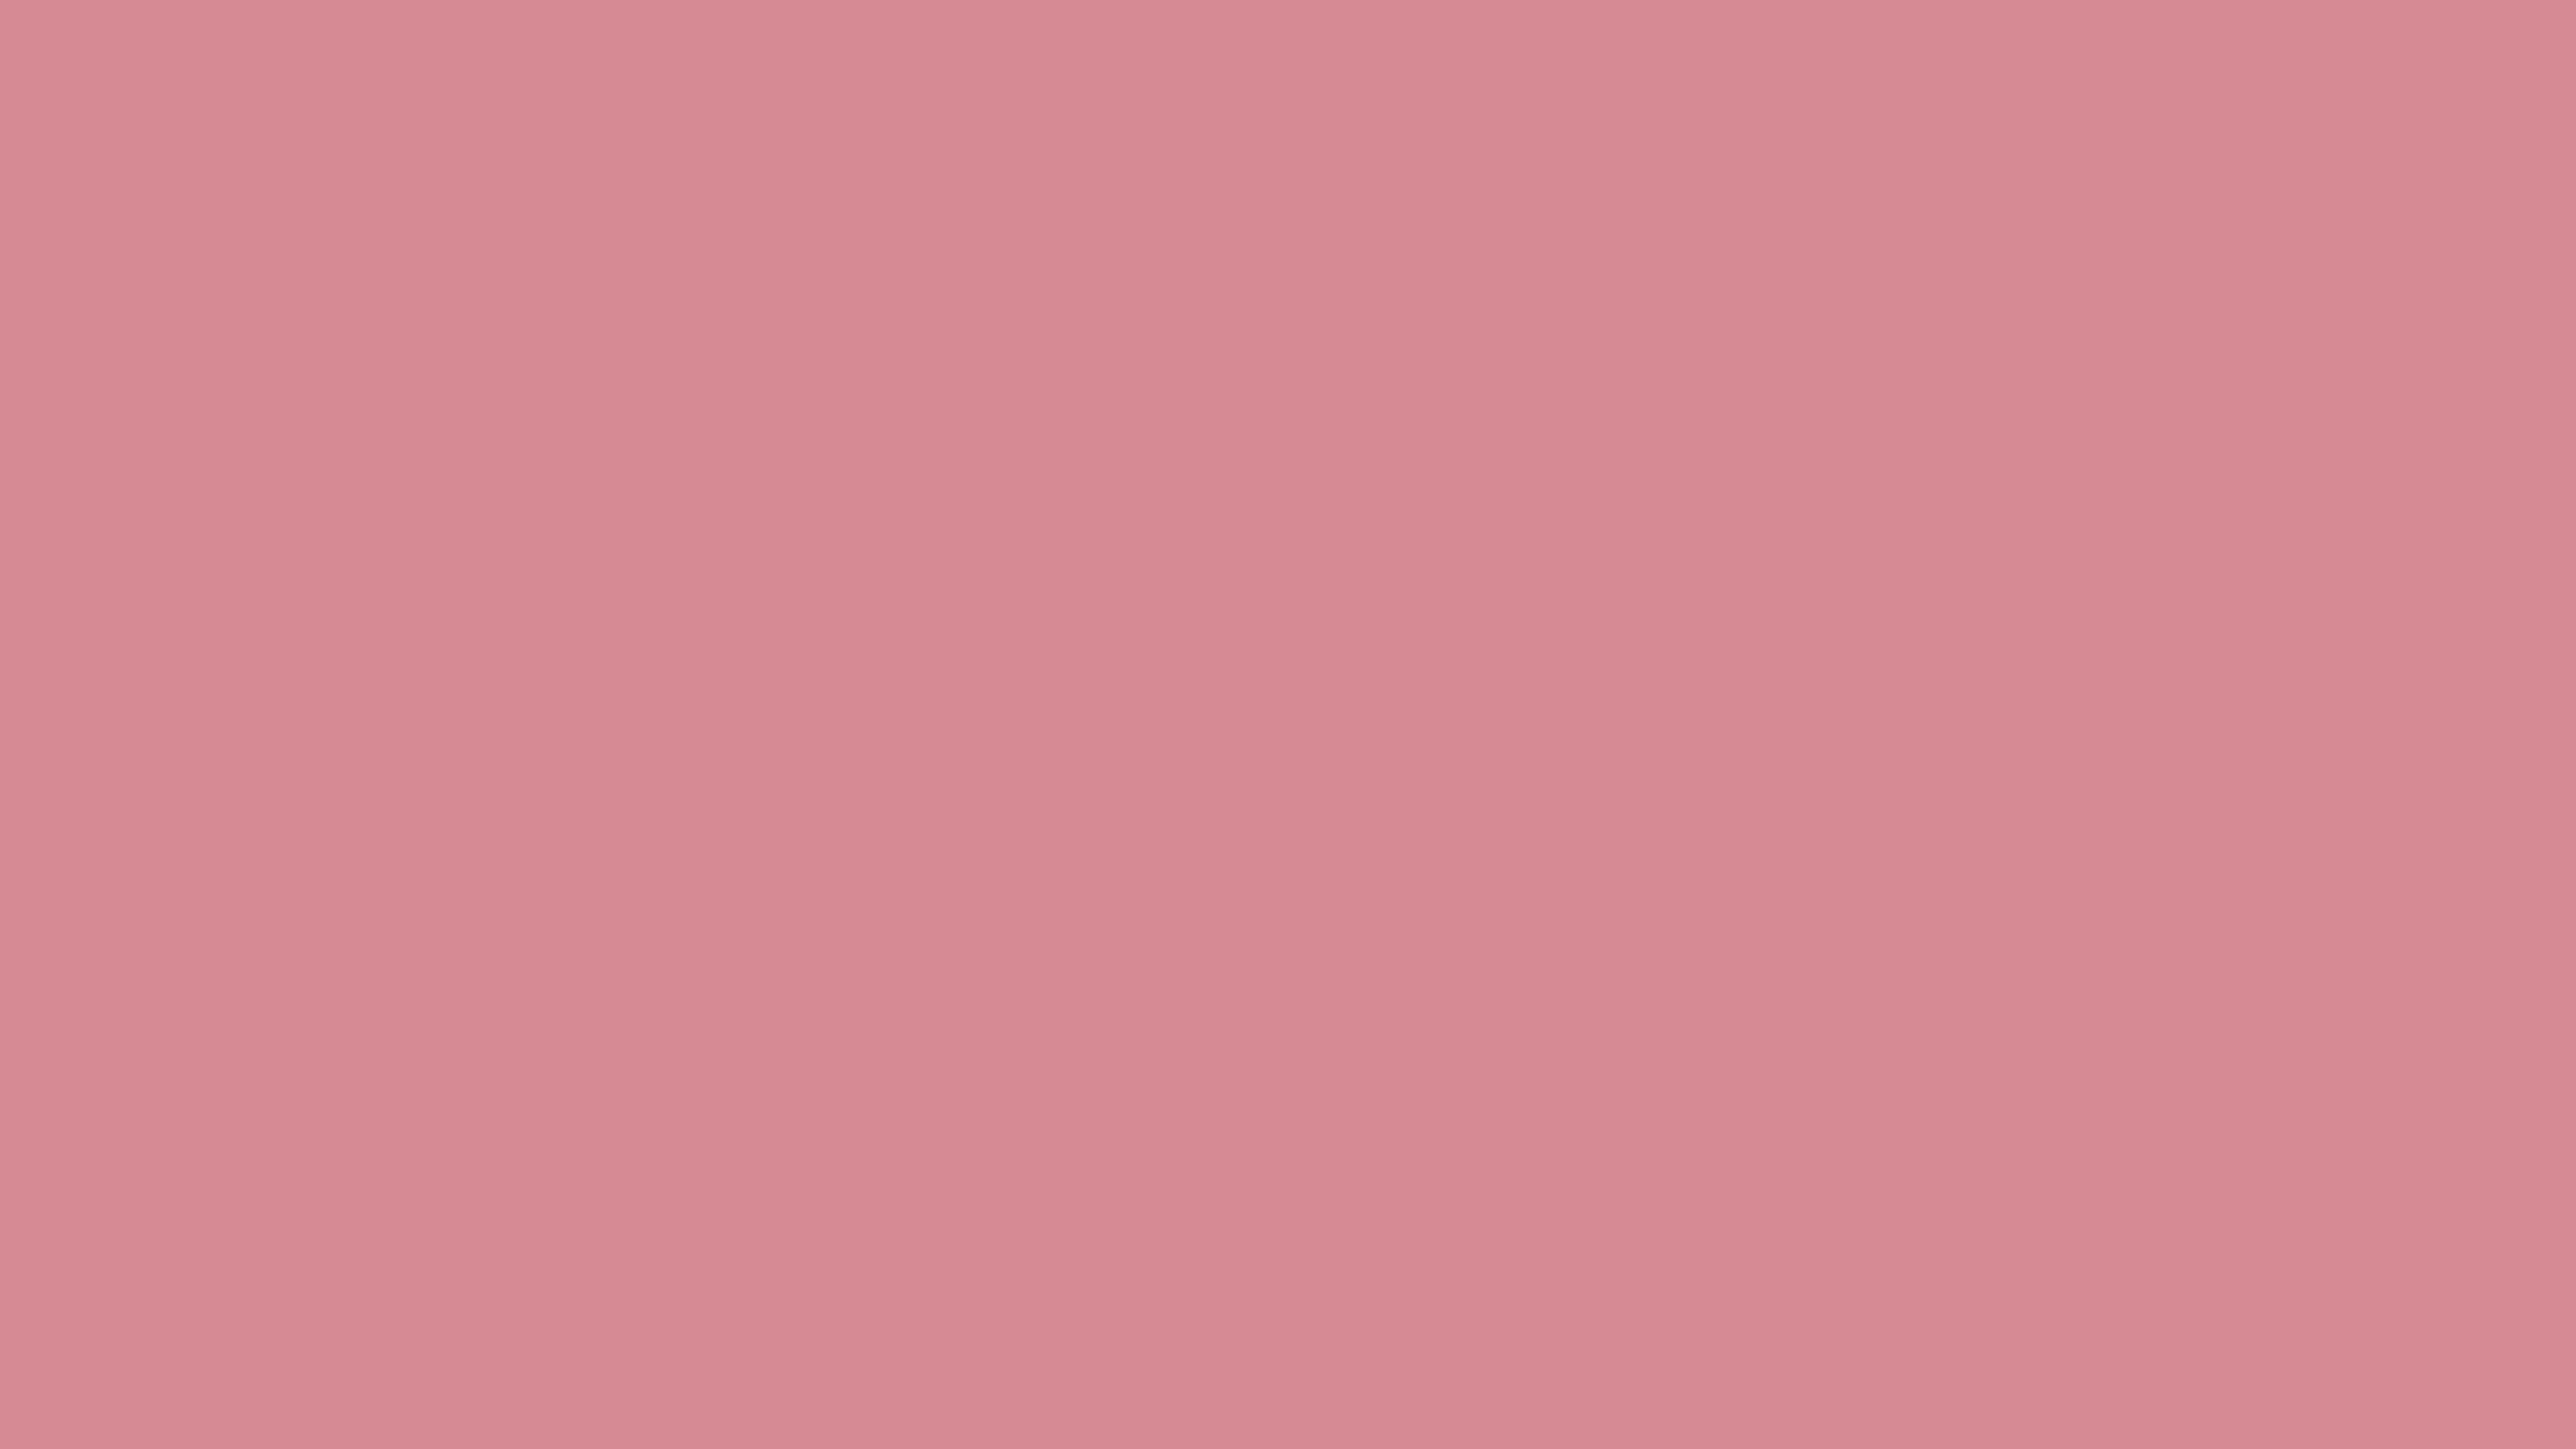 Dusty Pink Solid Color Background Image. Free Image Generator